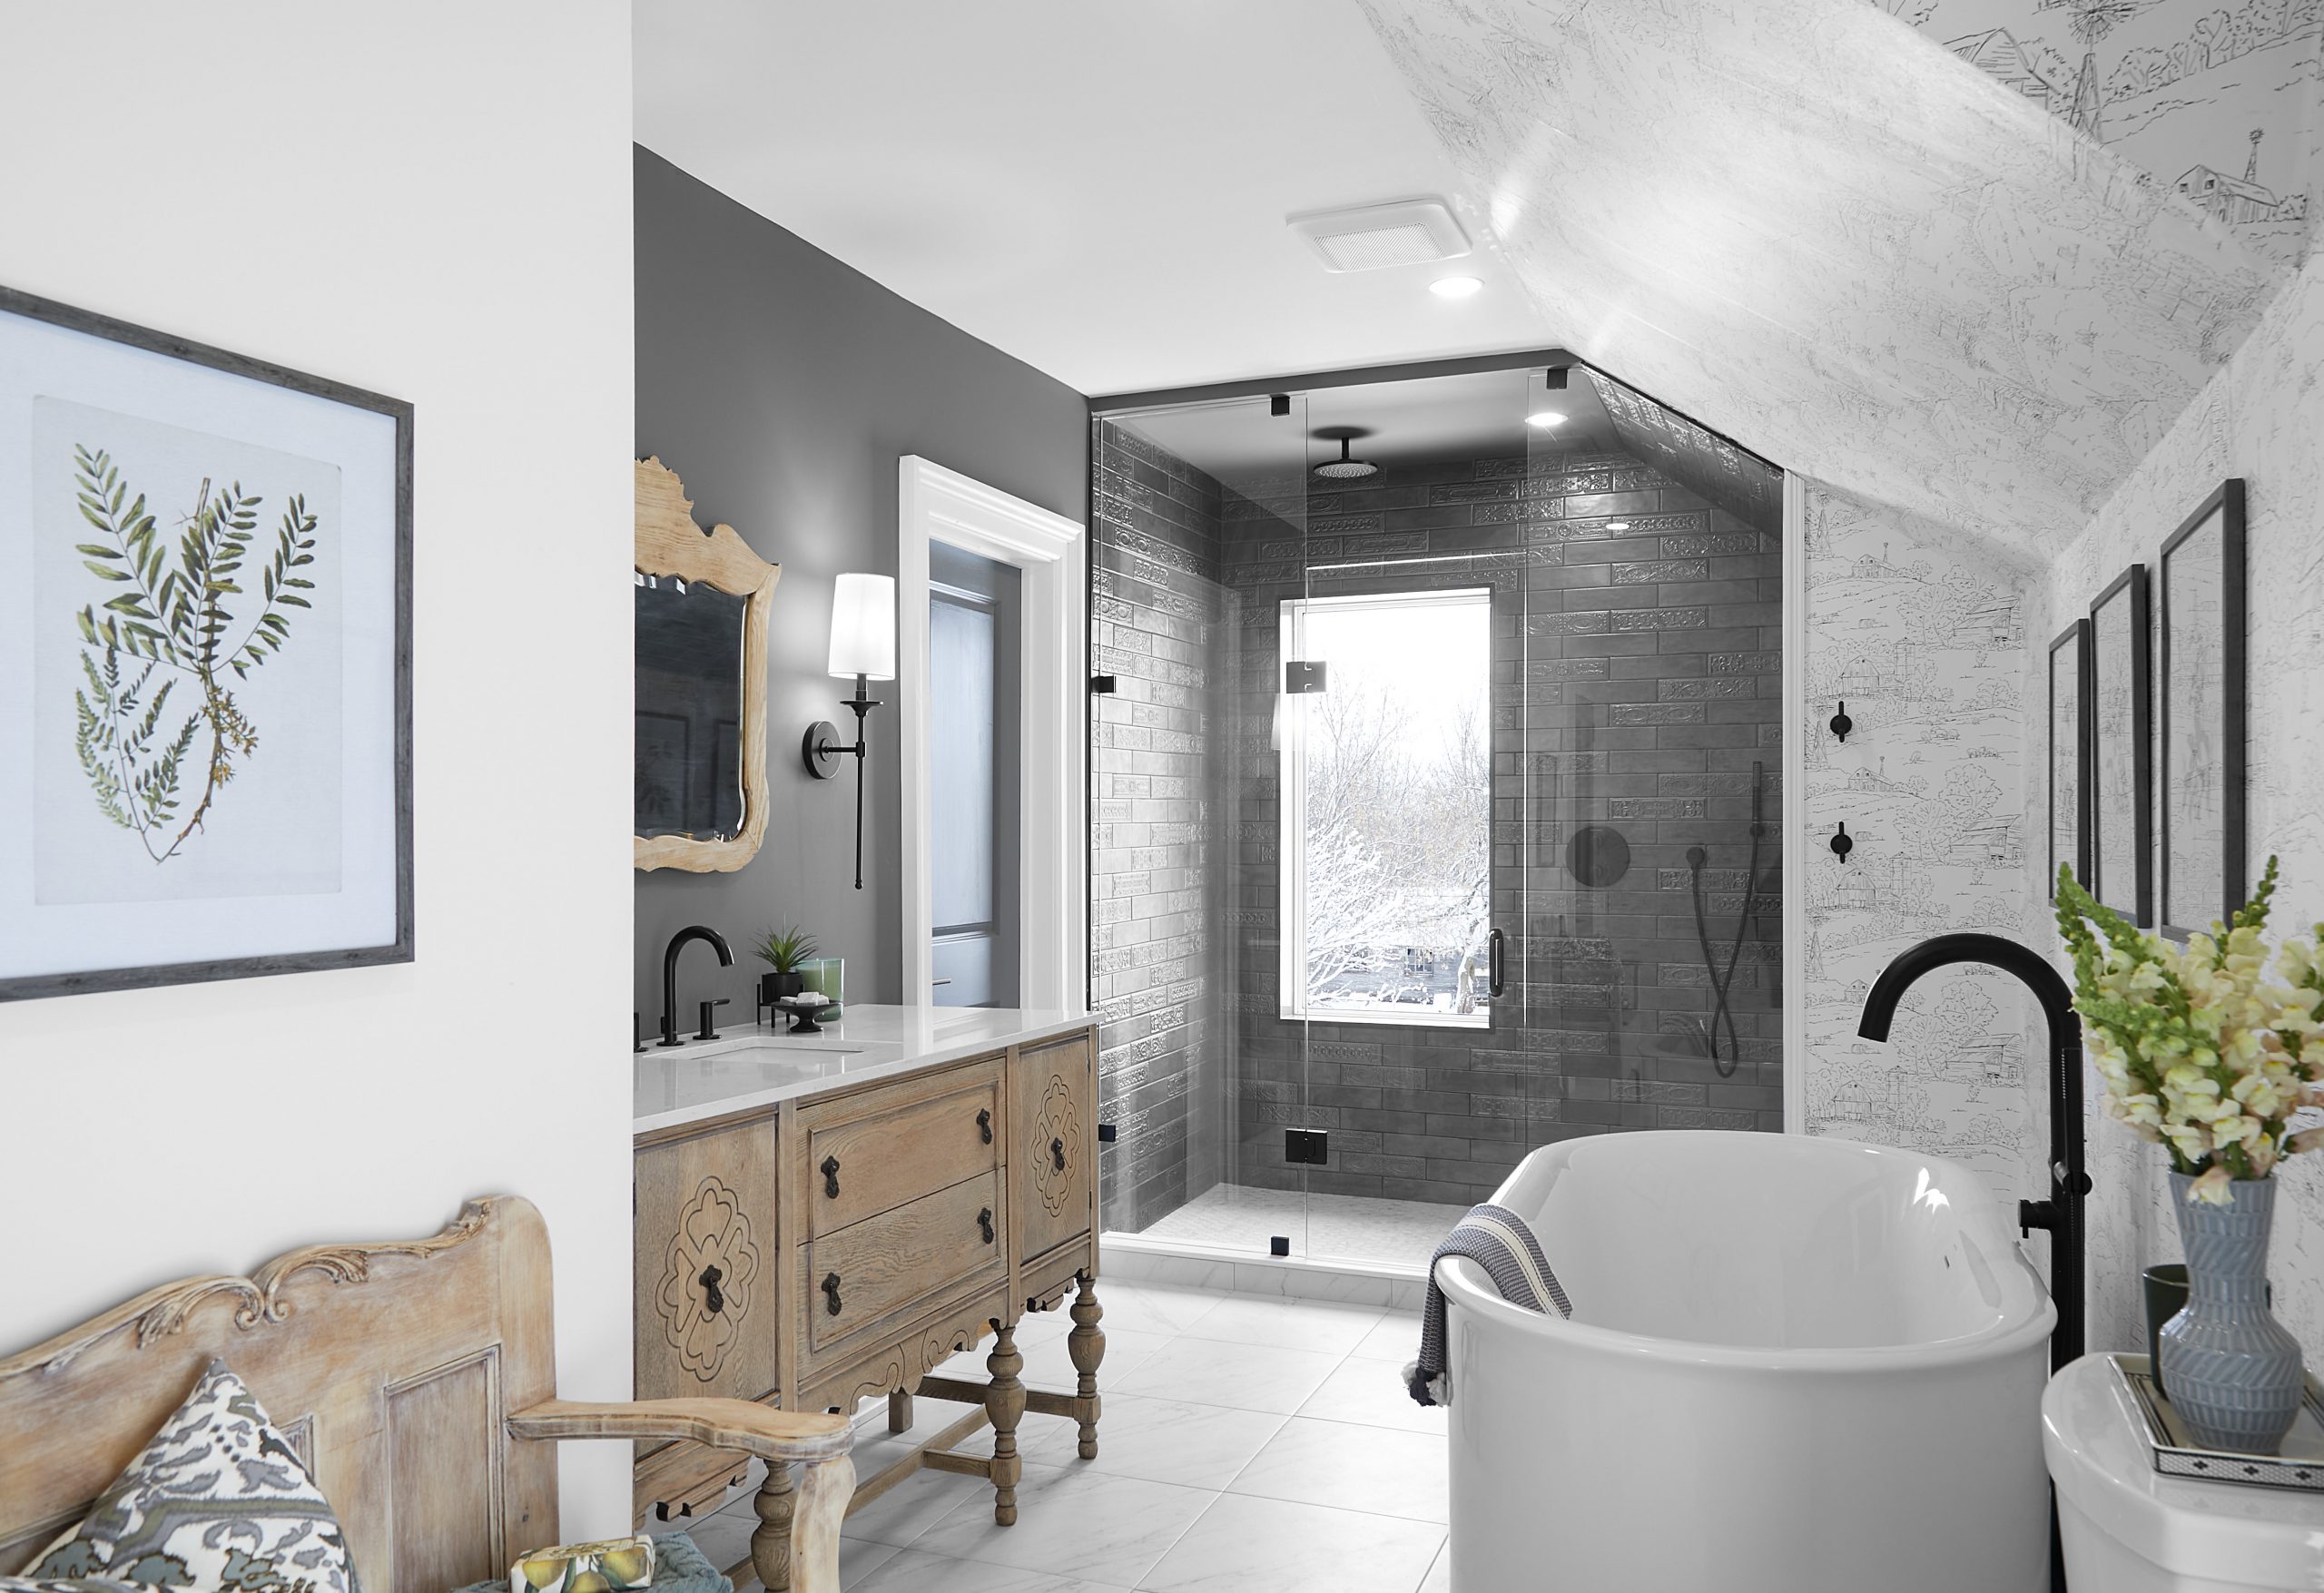 A modern farmhouse bathroom with repurposed antique vanity